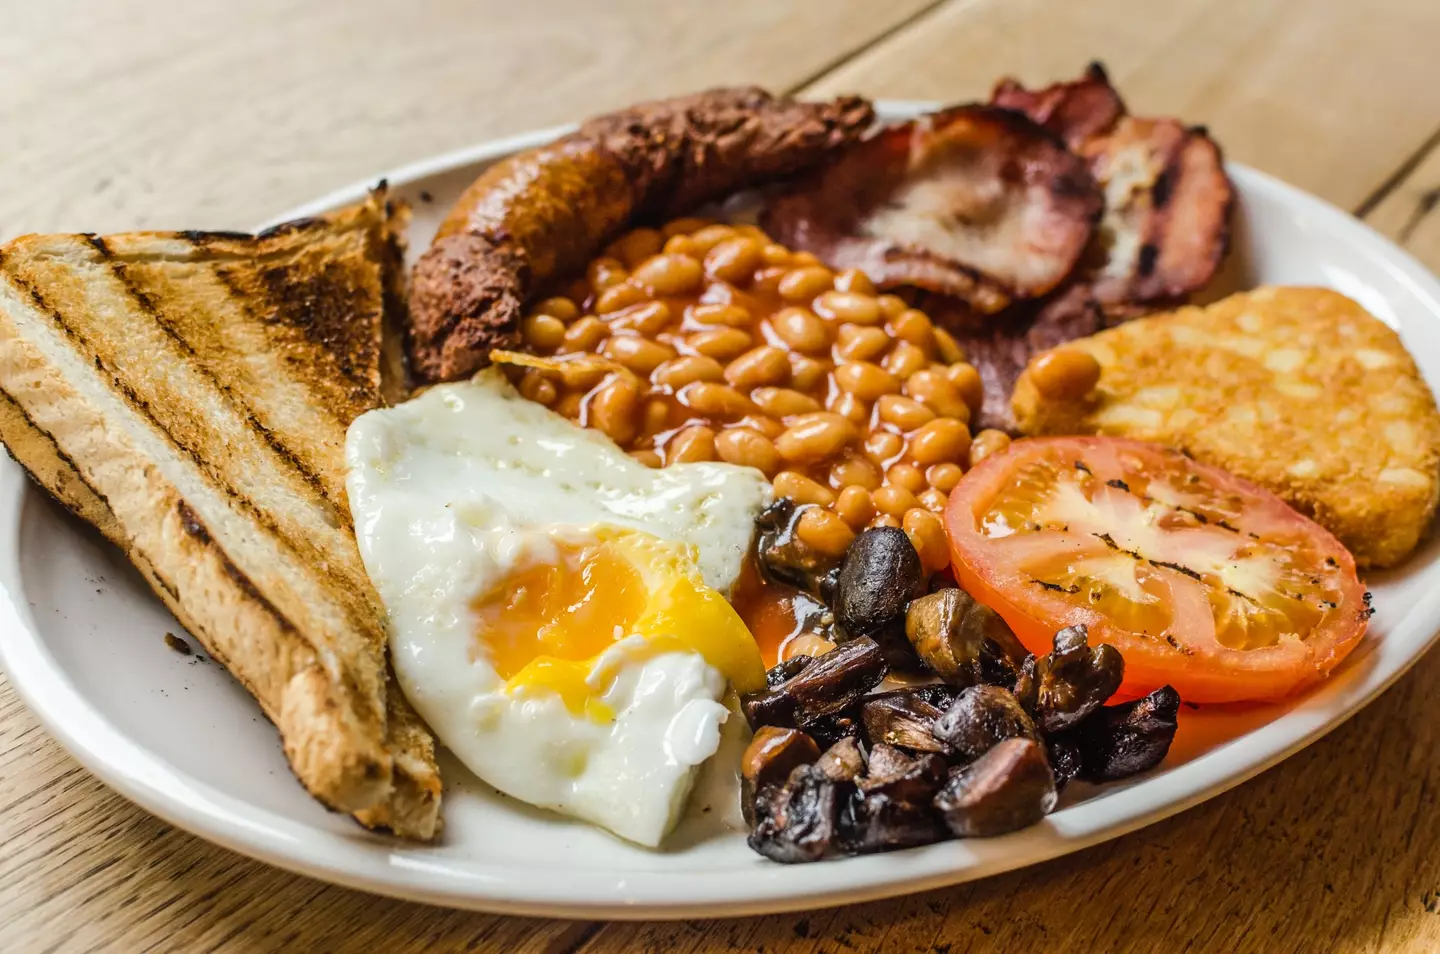 We're not sure if the big breakfast looked as good as this coming from the slow cooker...